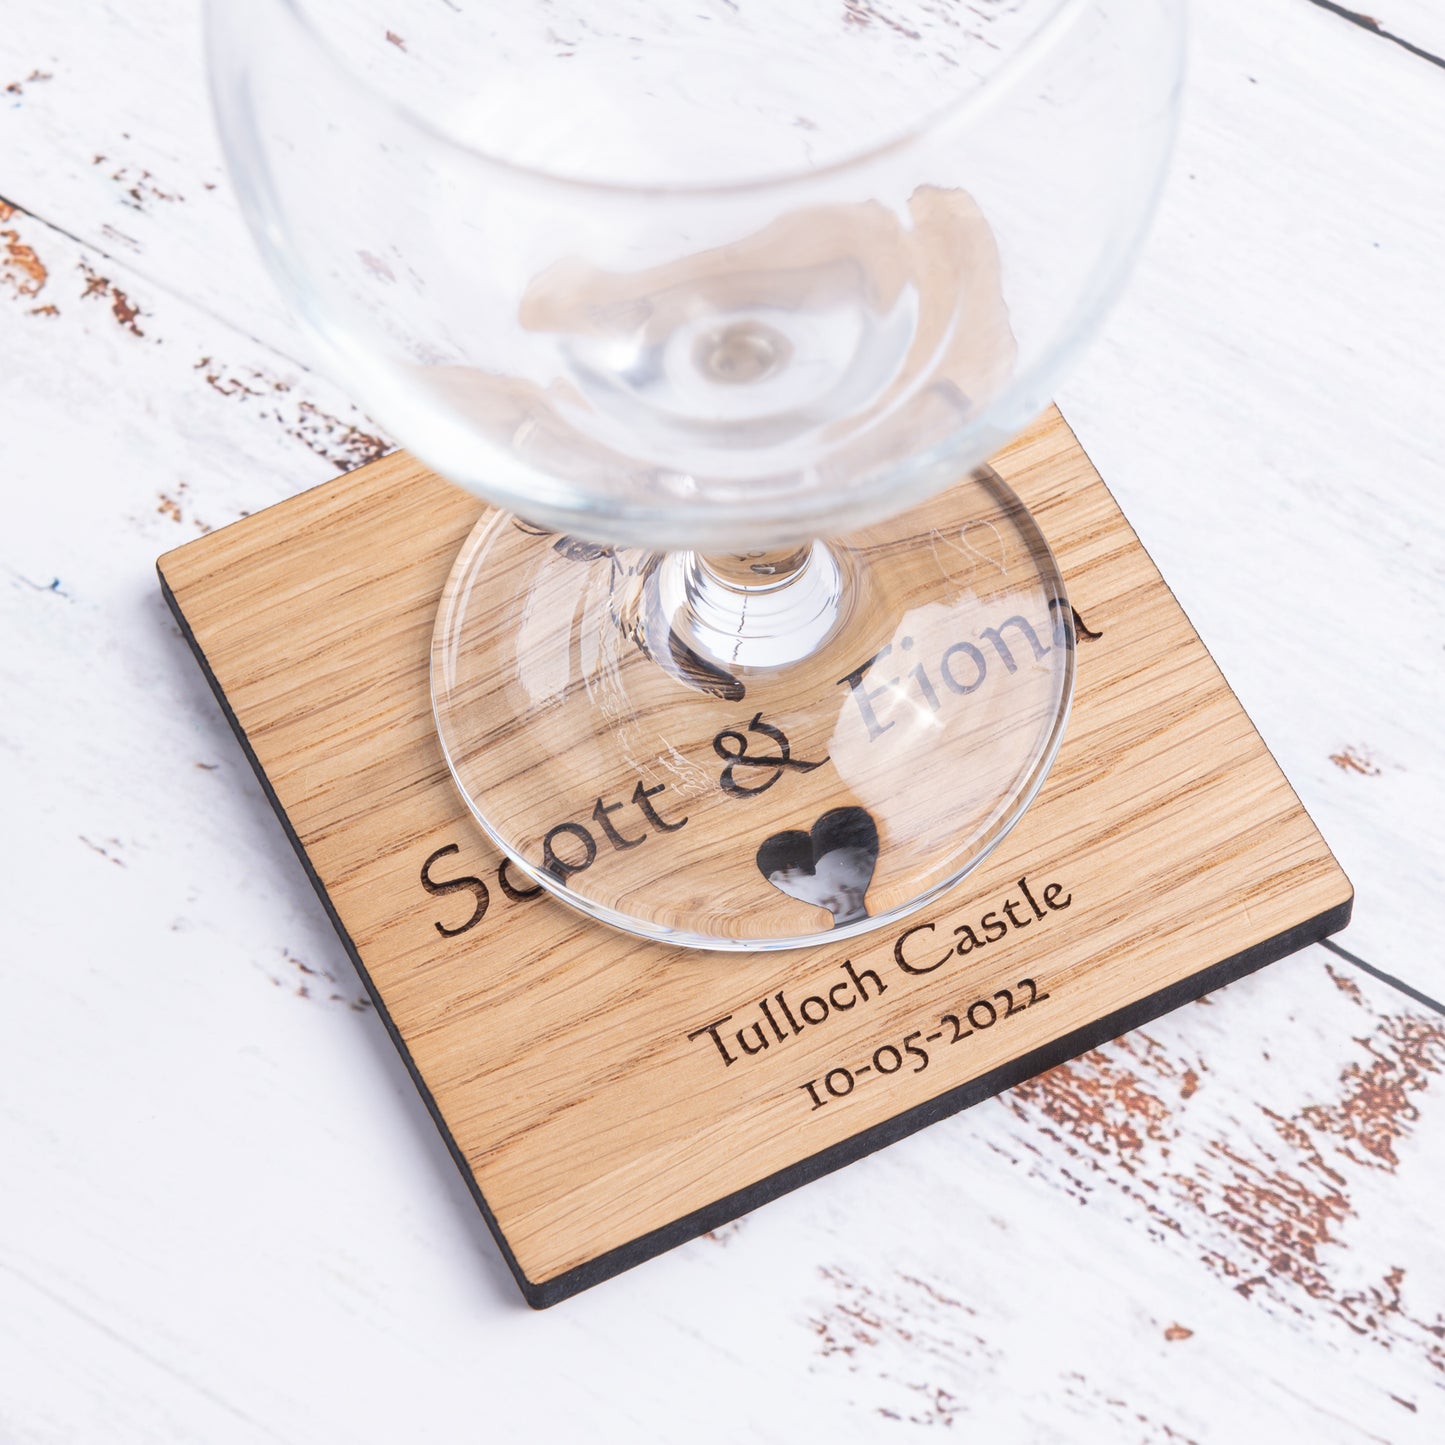 Scottish Stag - Personalised Wooden Wedding Coasters